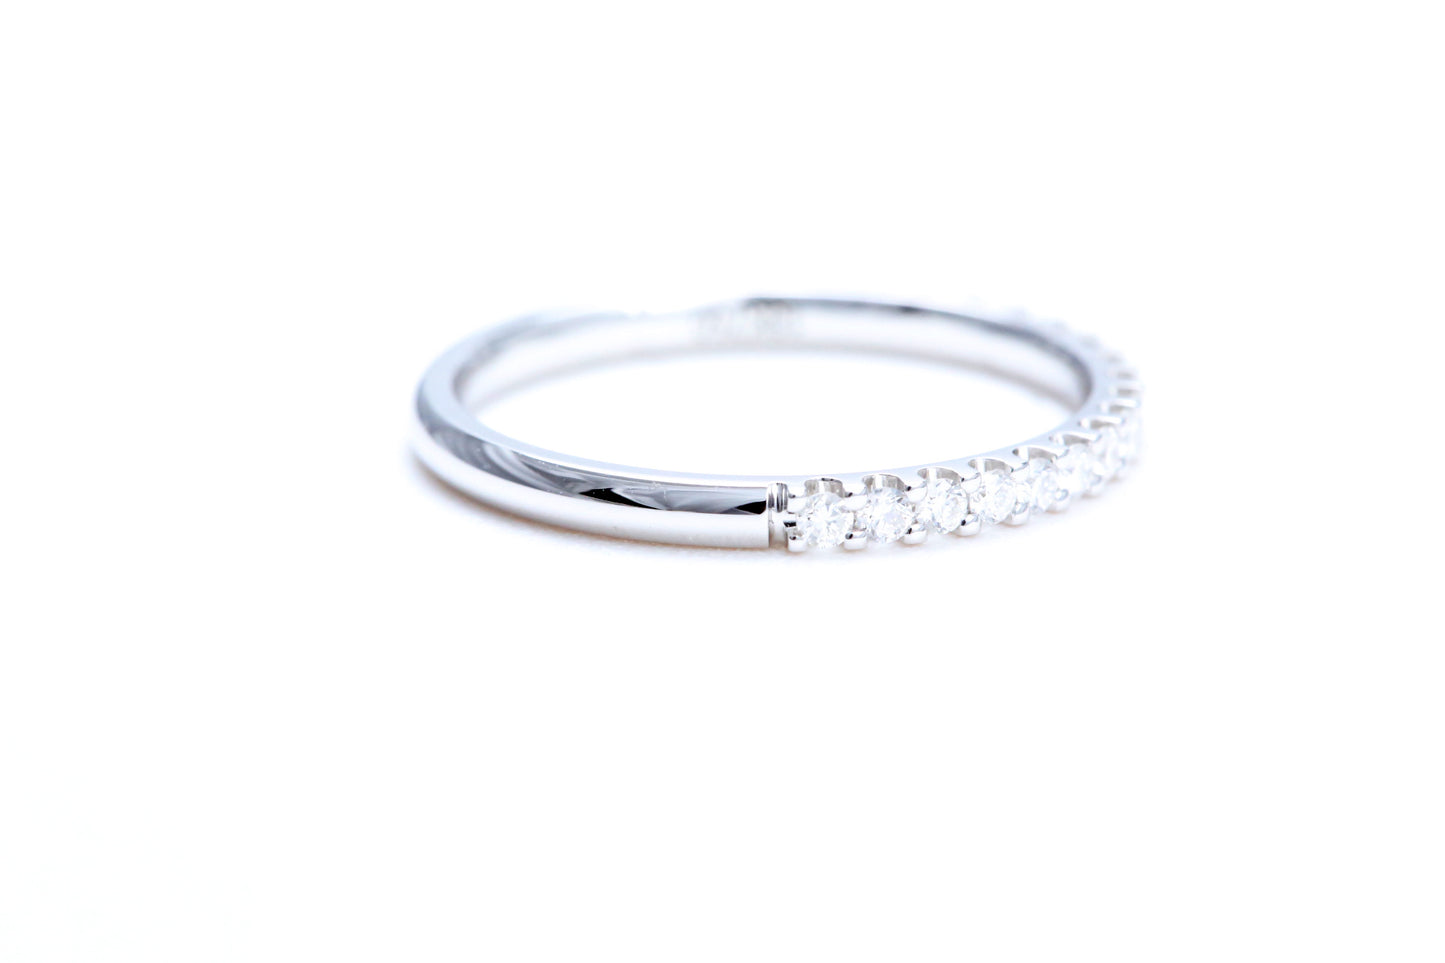 Minimalist Pavé Diamond Ring 1/4 of a carat total weight in 14K white gold